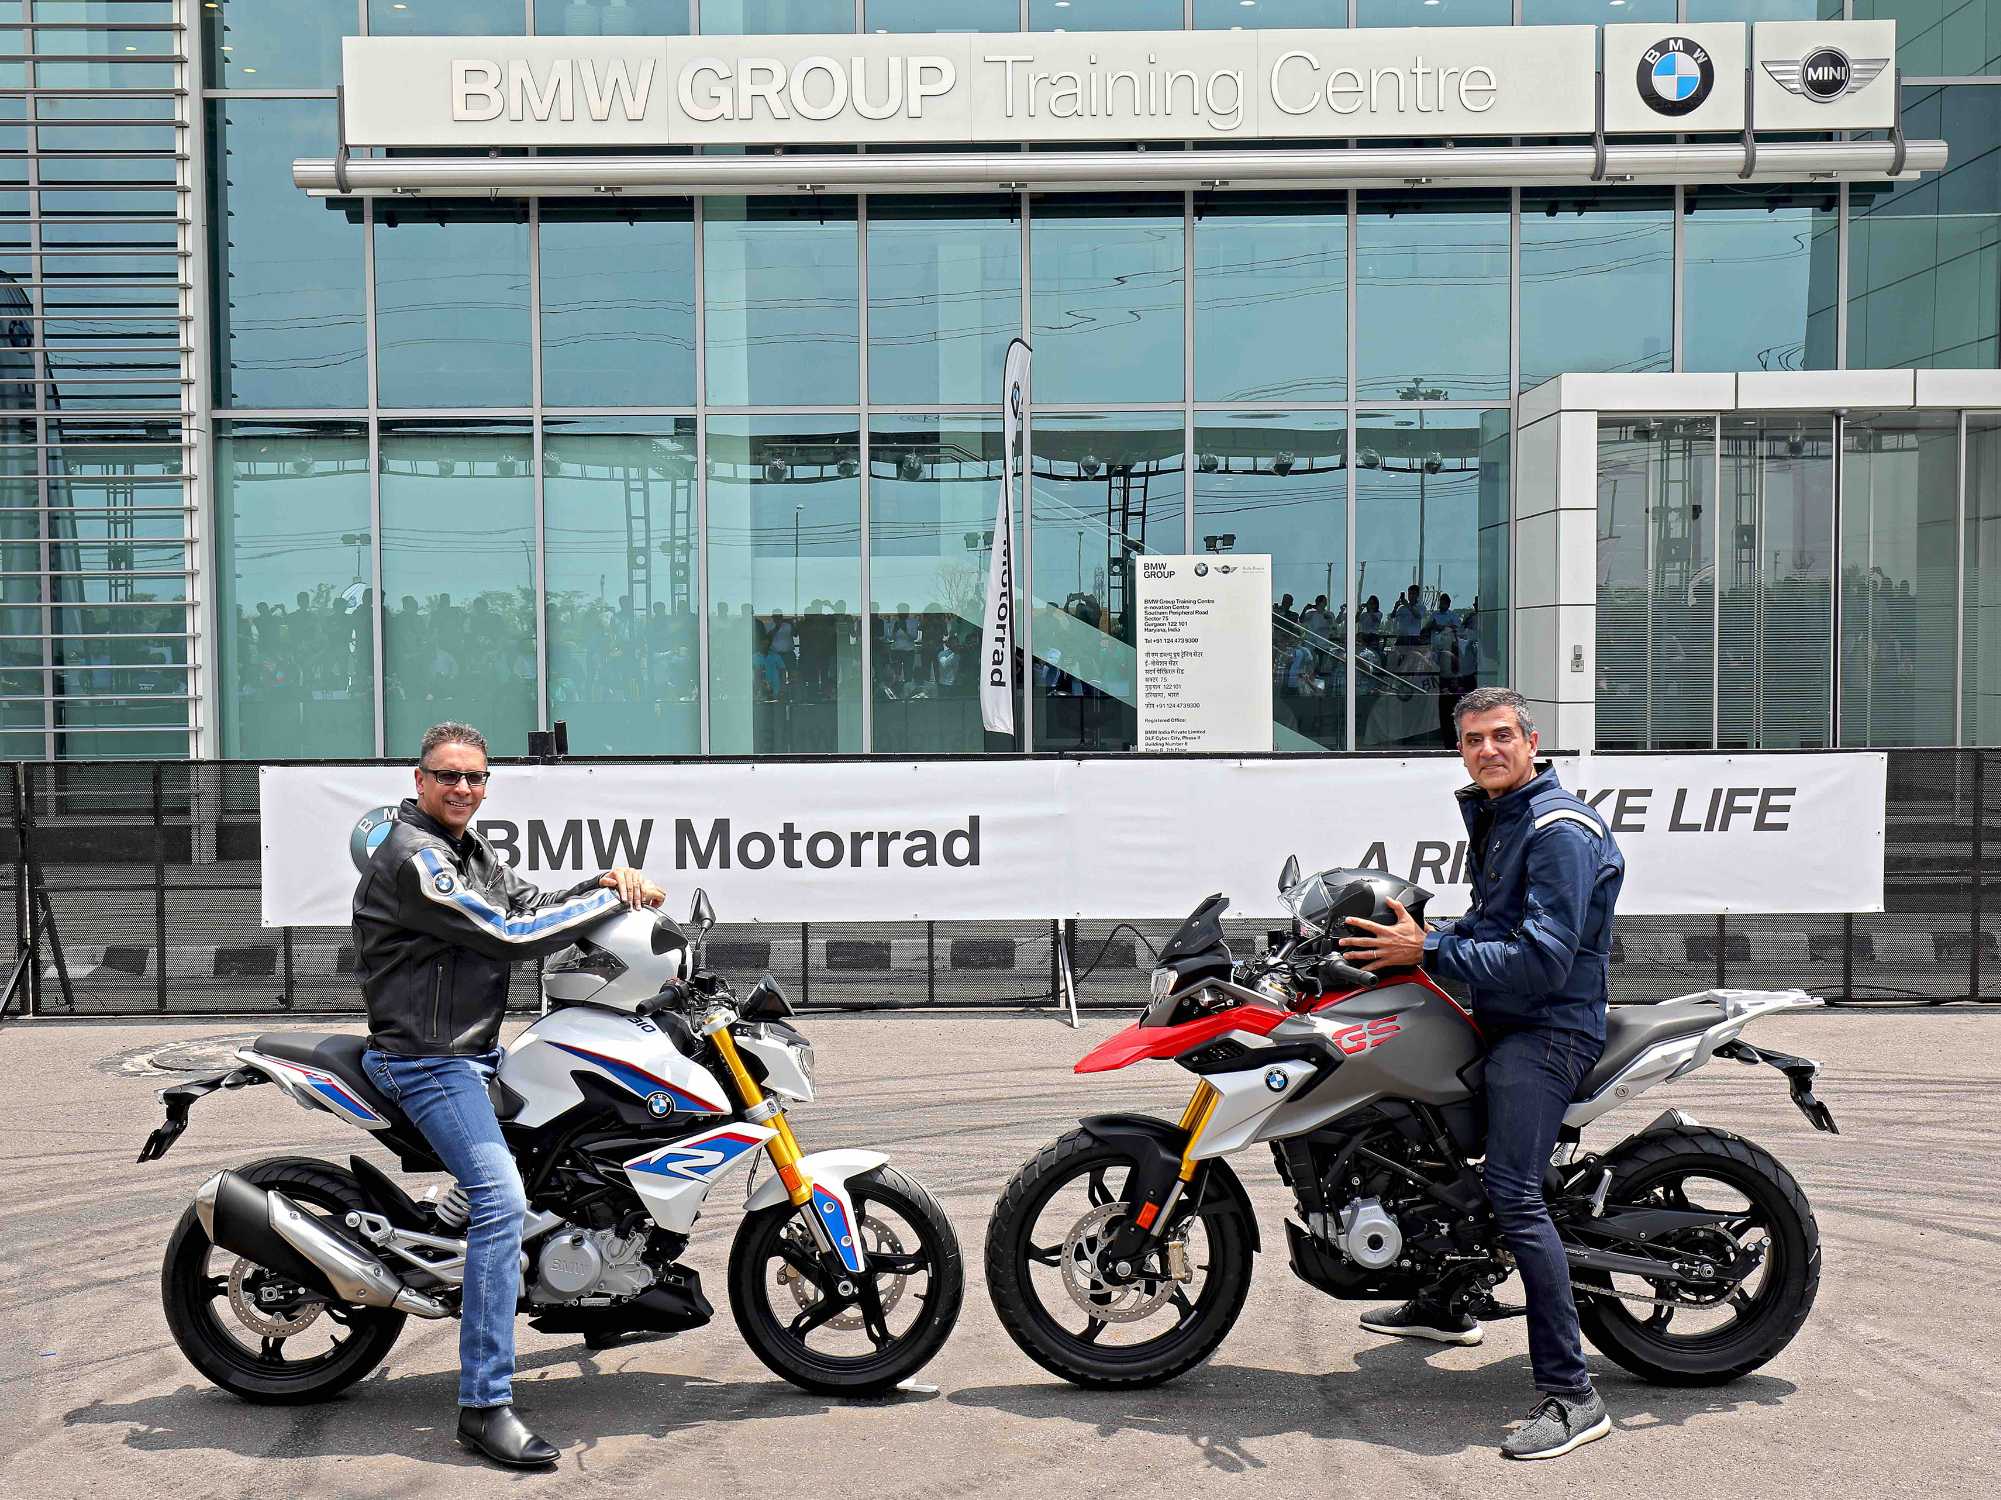 Make Life A Ride The All New Bmw G 310 R And The All New Bmw G 310 Gs Launched In India